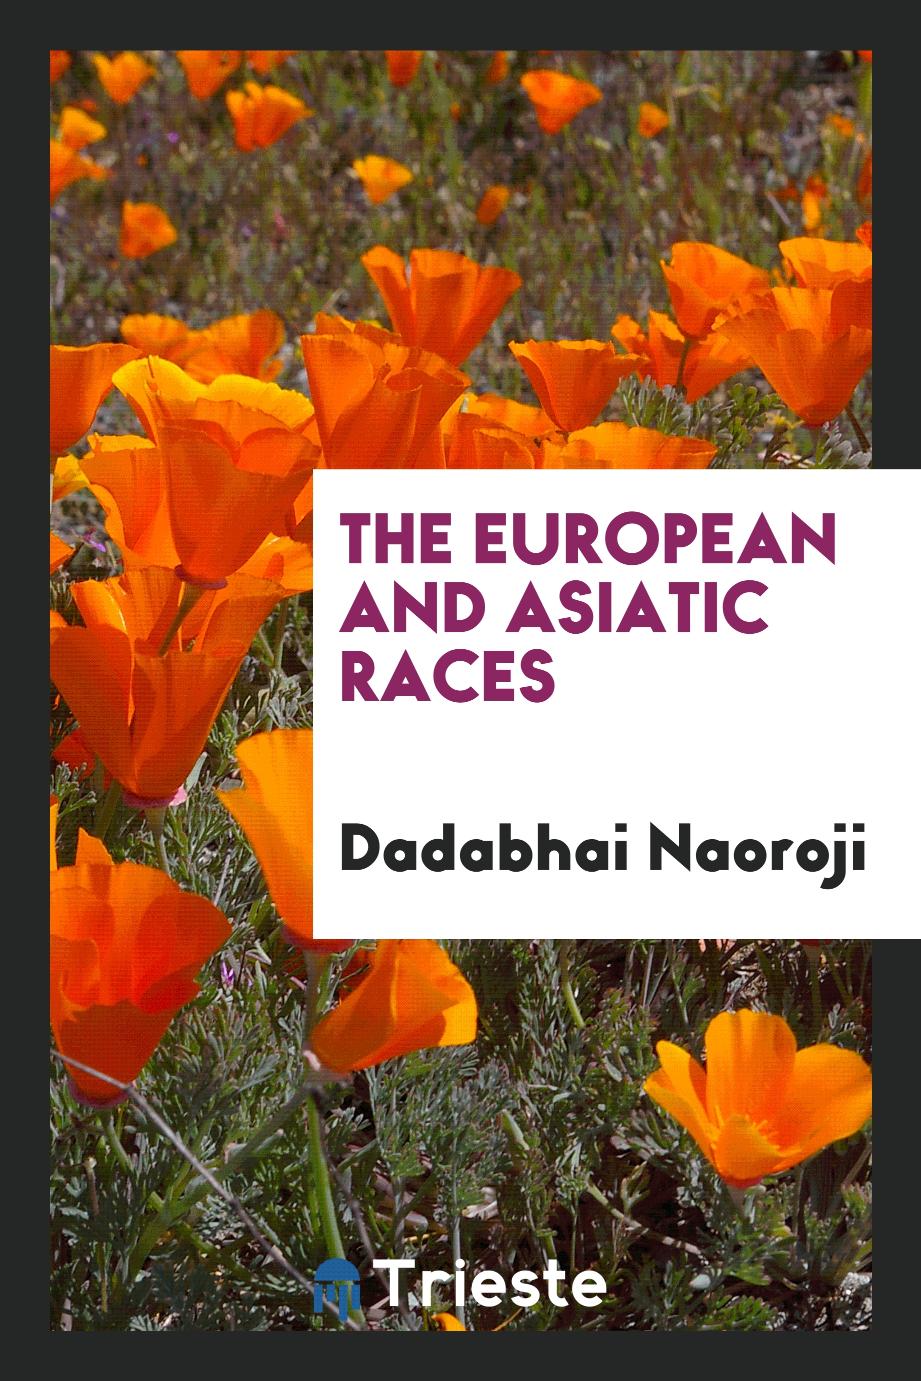 The European and Asiatic Races